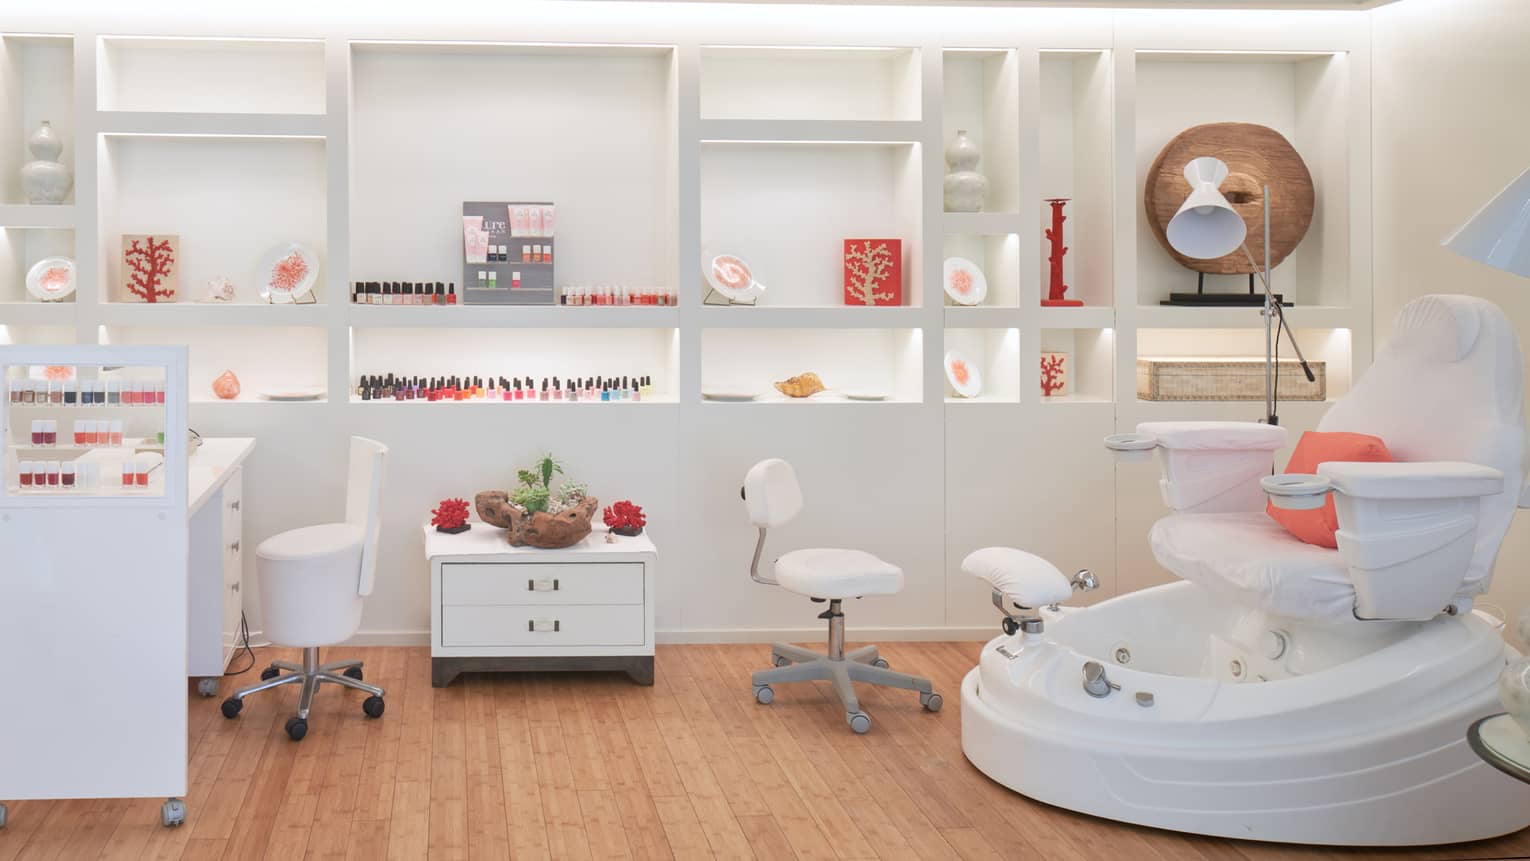 Spa nail bar with manicure station and polish, white wheeled stools, spa pedicure chair, shelving in back